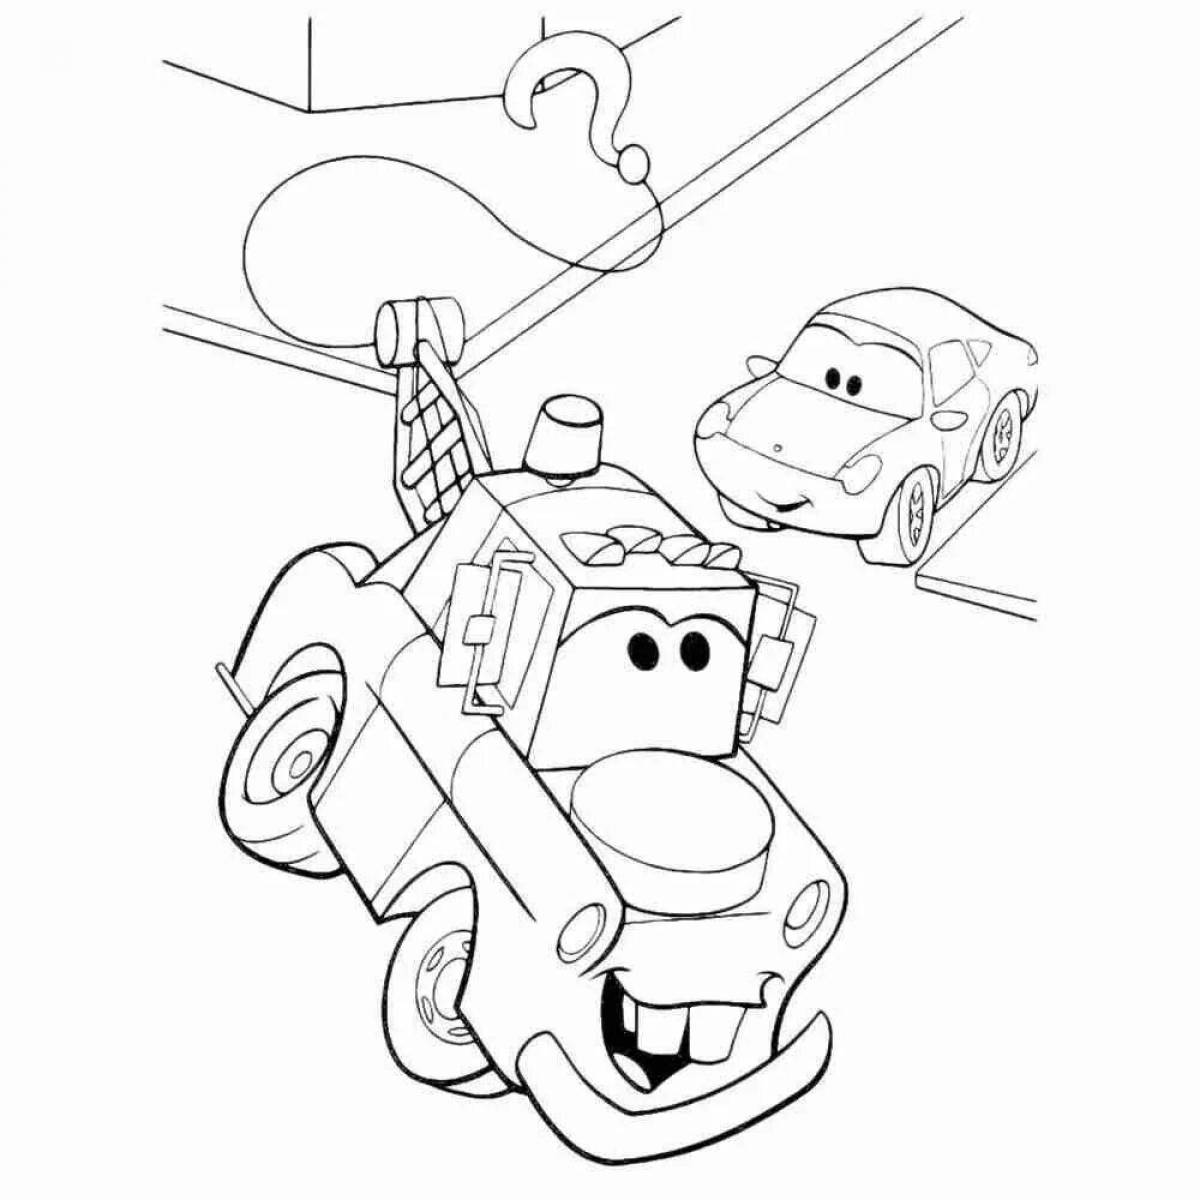 Sally's funny car coloring page